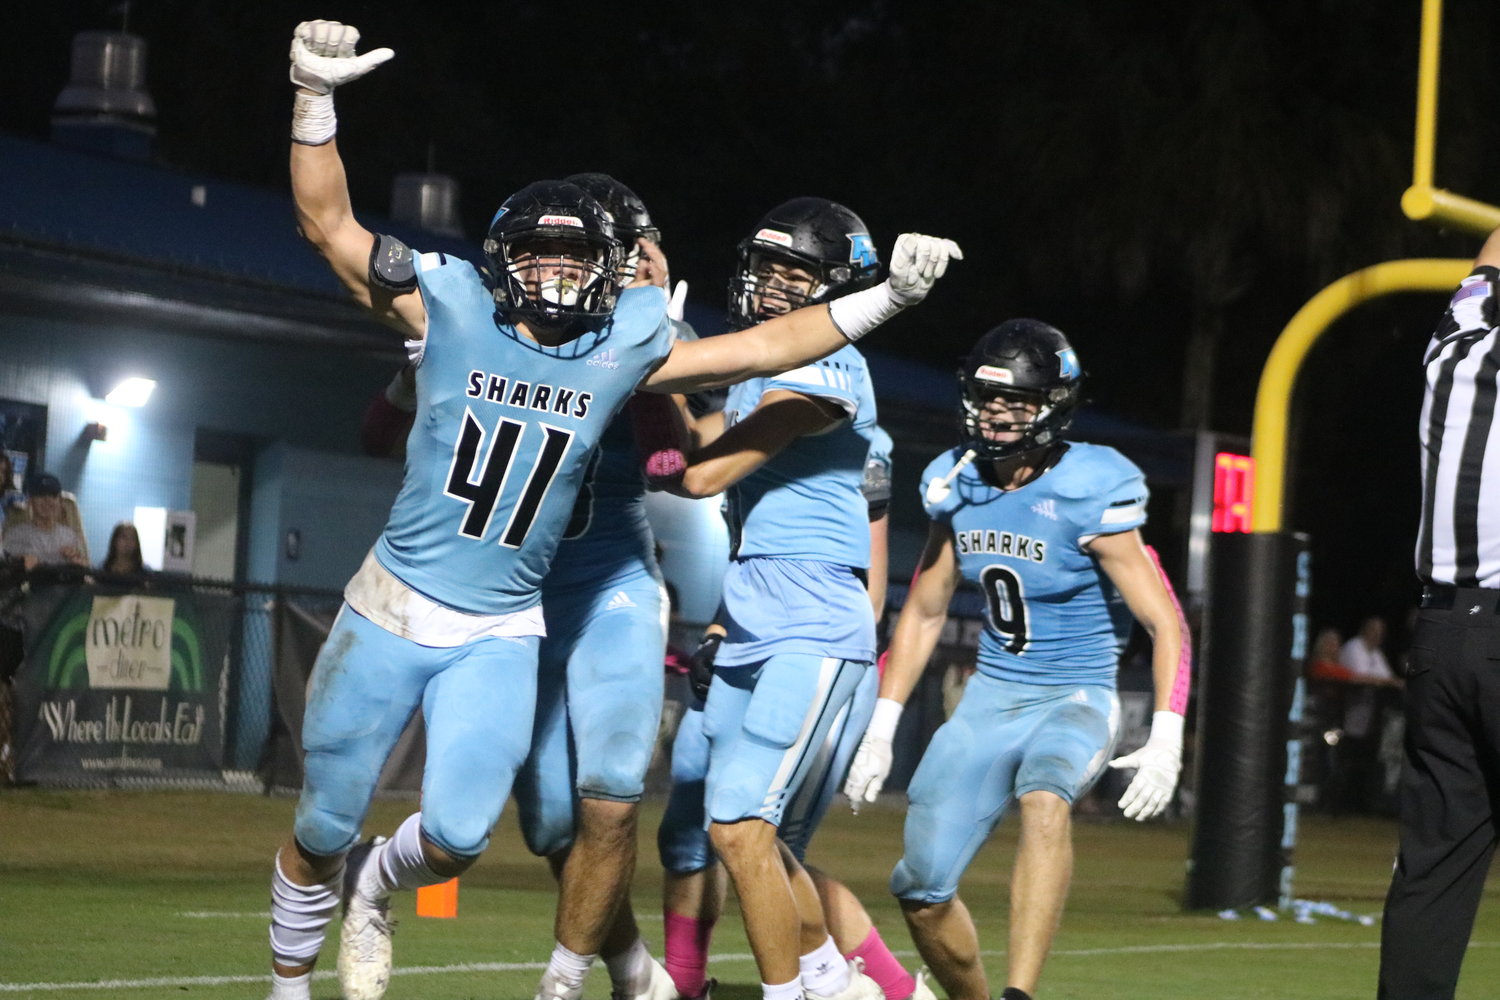 Layne Swafford (No. 41) of Ponte Vedra celebrates a safety against Bartram Trail. The Sharks will face Fletcher on senior night at 7 p.m. Friday, Oct. 29.